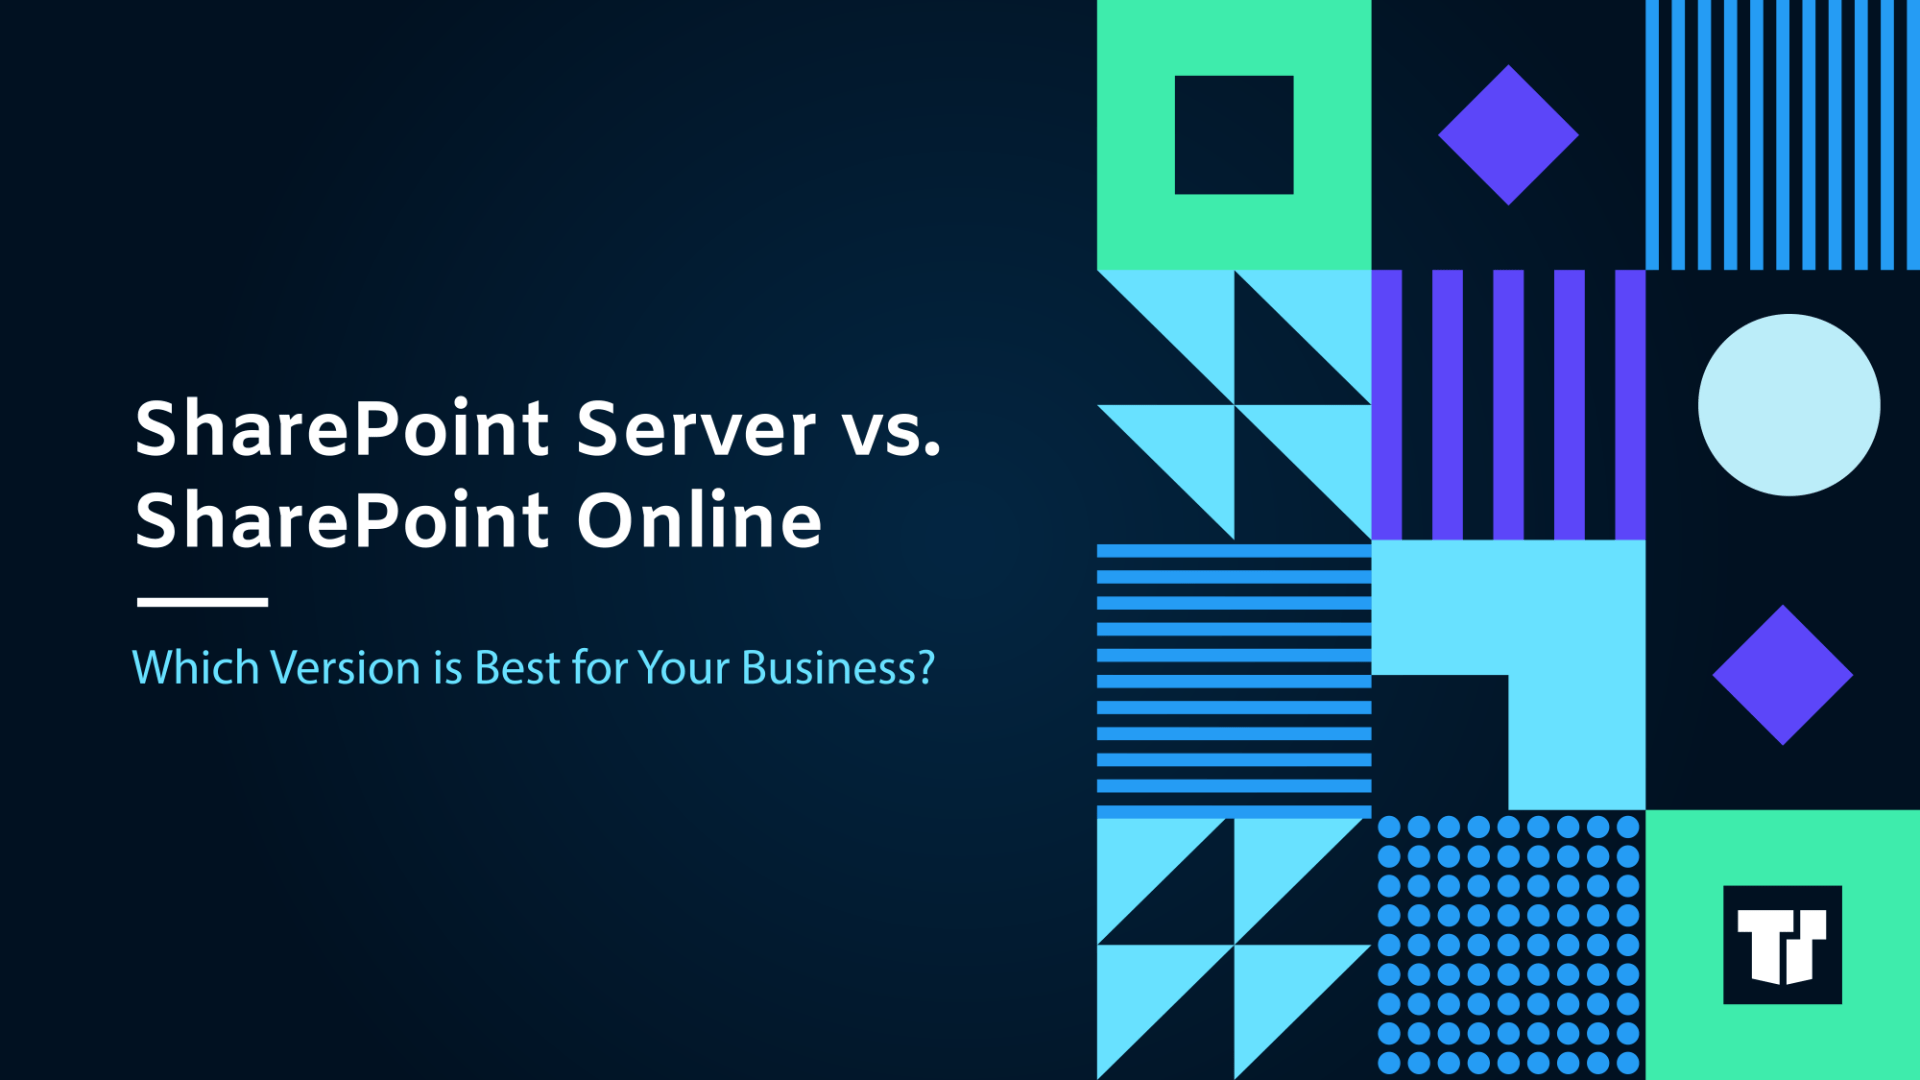 SharePoint Server vs. SharePoint Online: Which Version is Best for Your Business? cover image